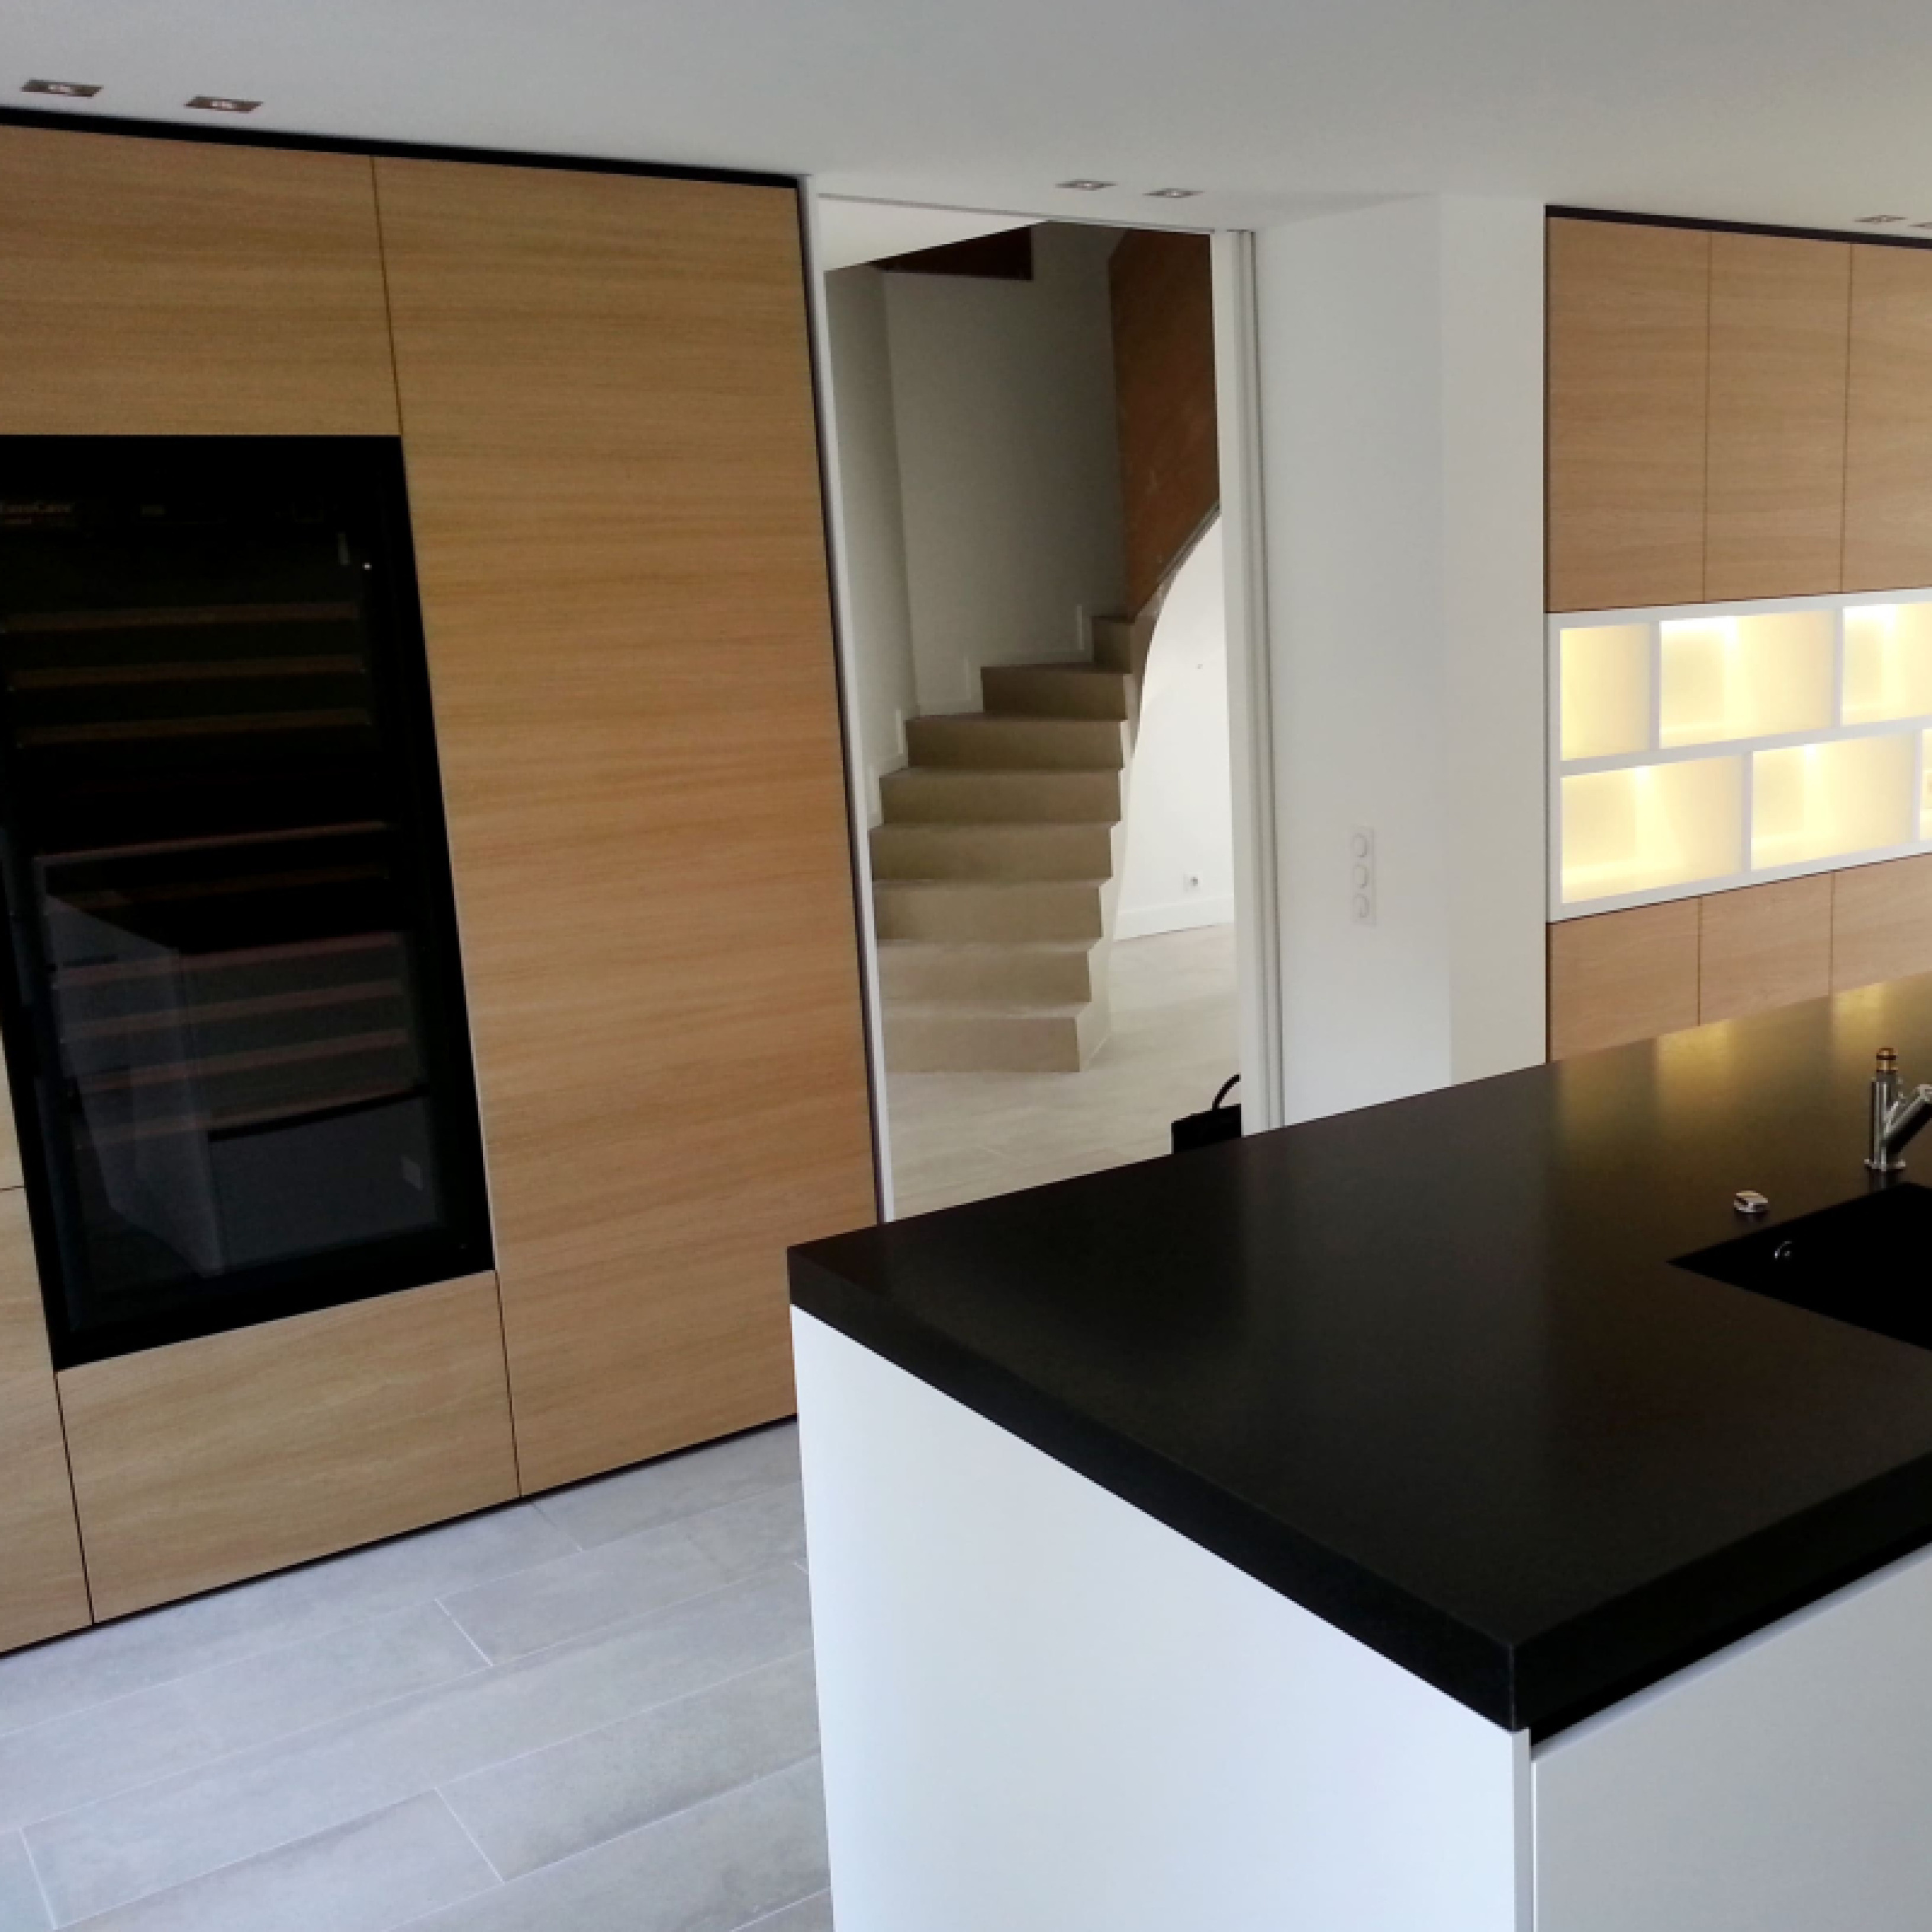 Kitchen renovation with incorporation of a  EuroCave wine cabinet. - Anthony Gelin - Interior designer